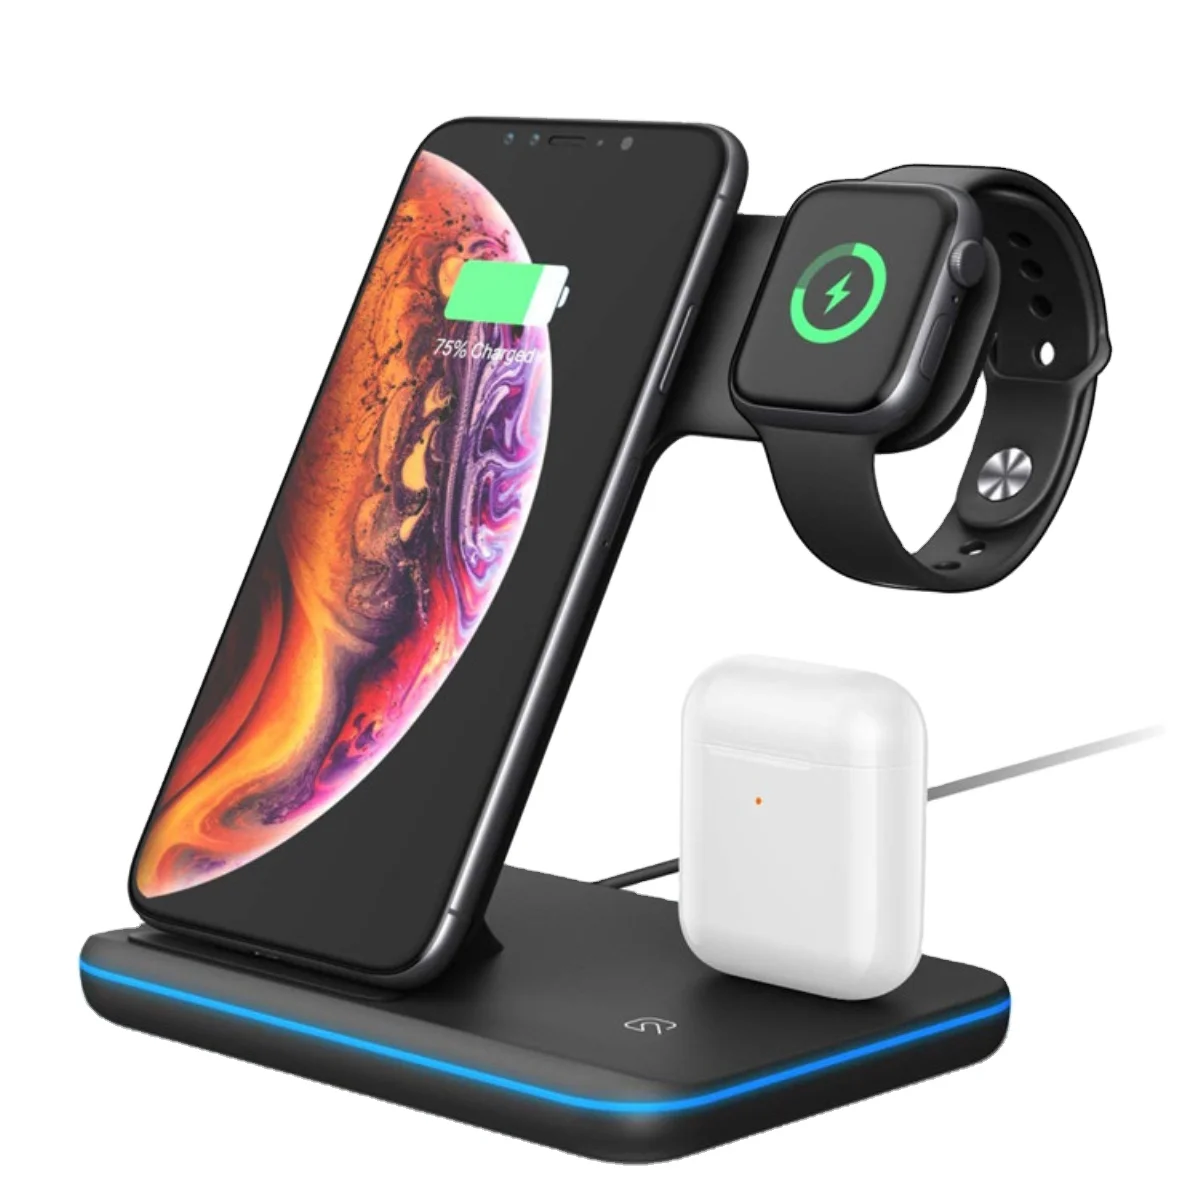 

2020 Trending Produce Cellphone Qi Wireless Charger Portable 3 in 1 Charging Station For iPhone Earbuds for AirPods, White/black